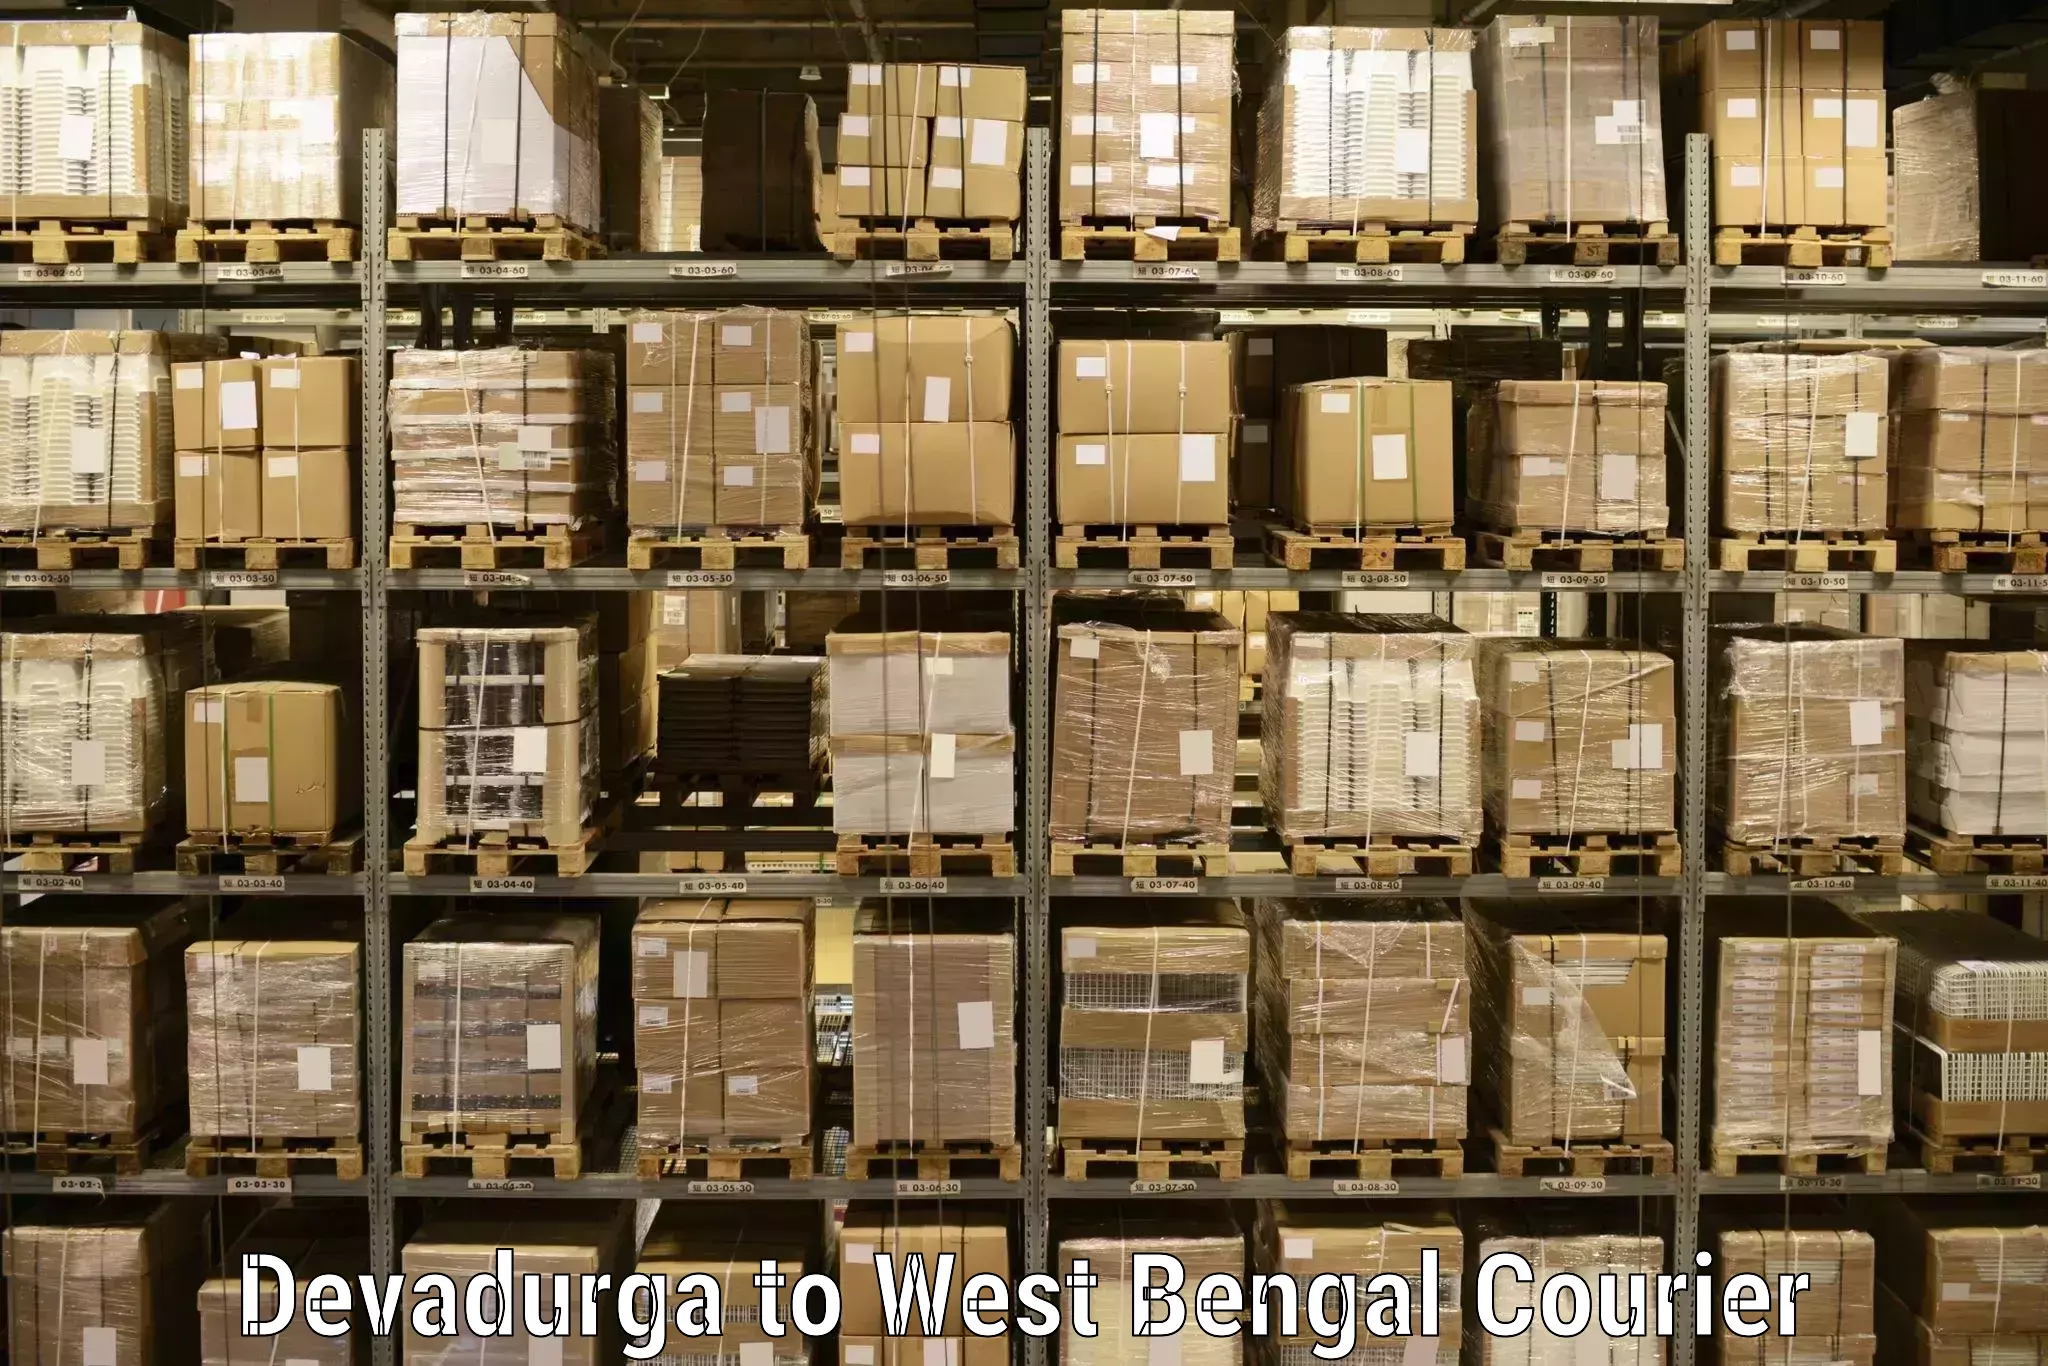 Easy access courier services in Devadurga to Balurghat